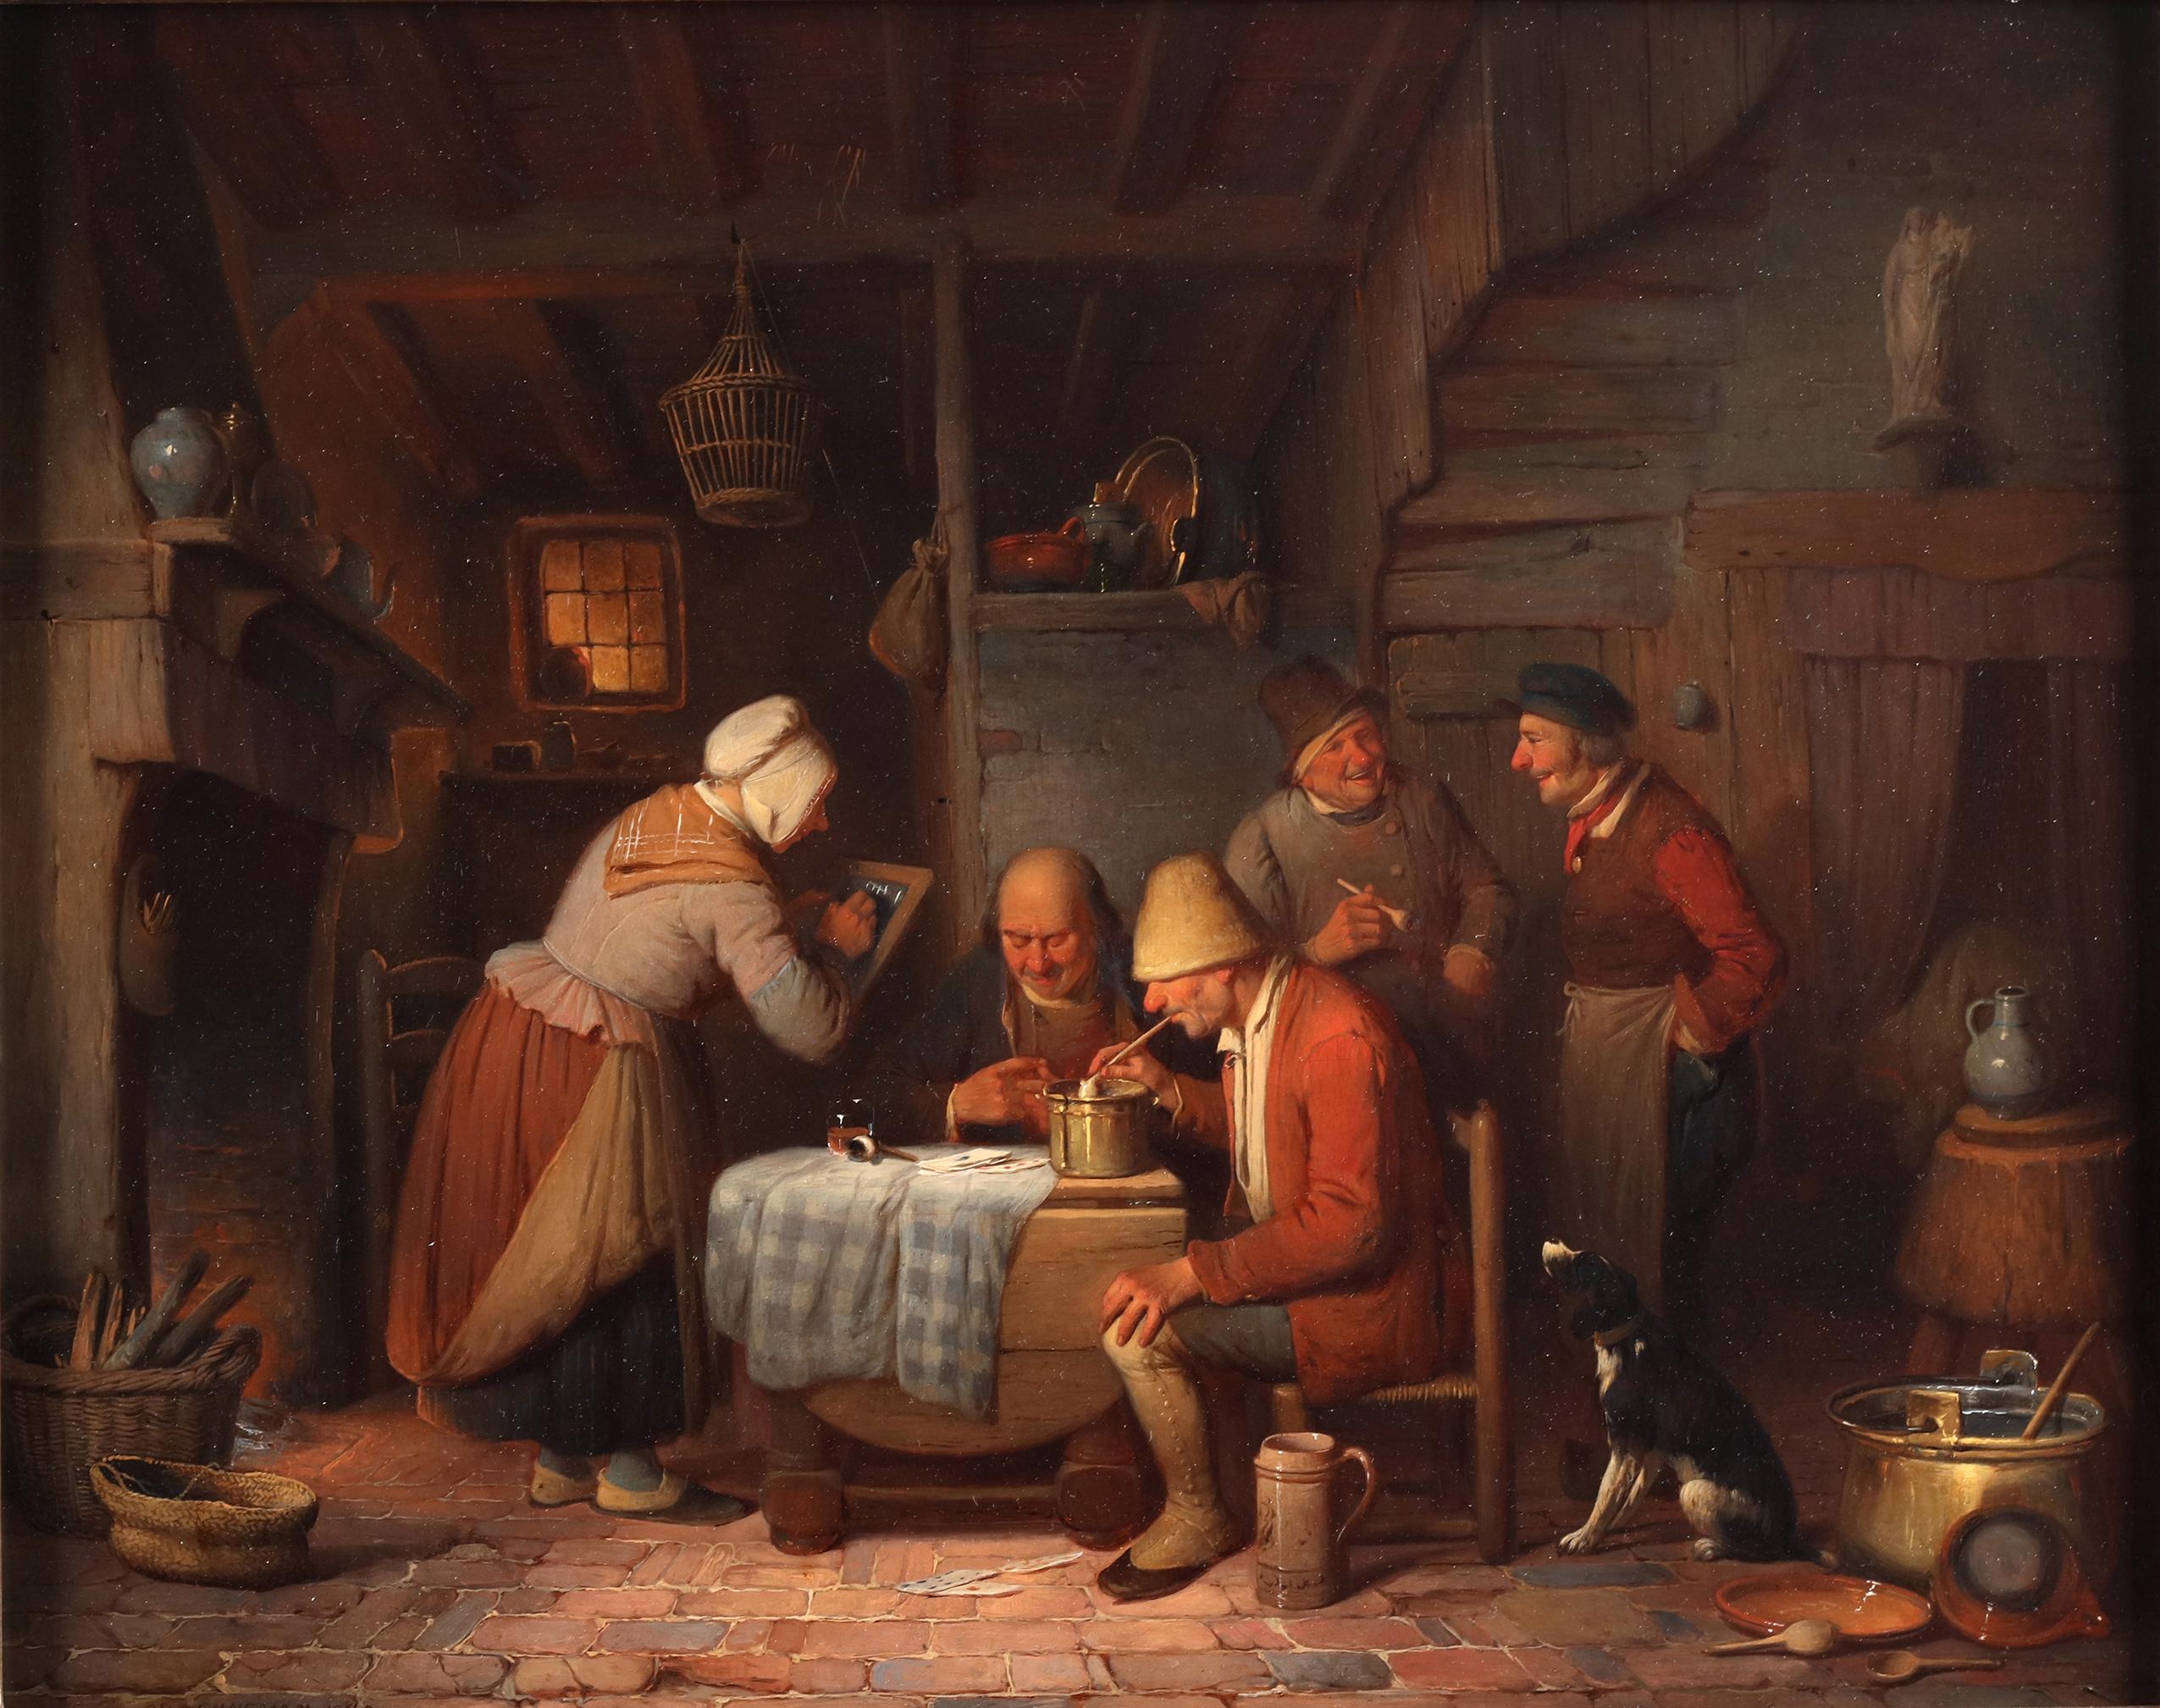 Oil on panel
Signed lower left: "Ch. Venneman 1854"

A scene of lively camarderie and warmth unfolds within the intimate confines of a rustic inn. The artist masterfully captures the essence of conviviality and merriment in this charming interior